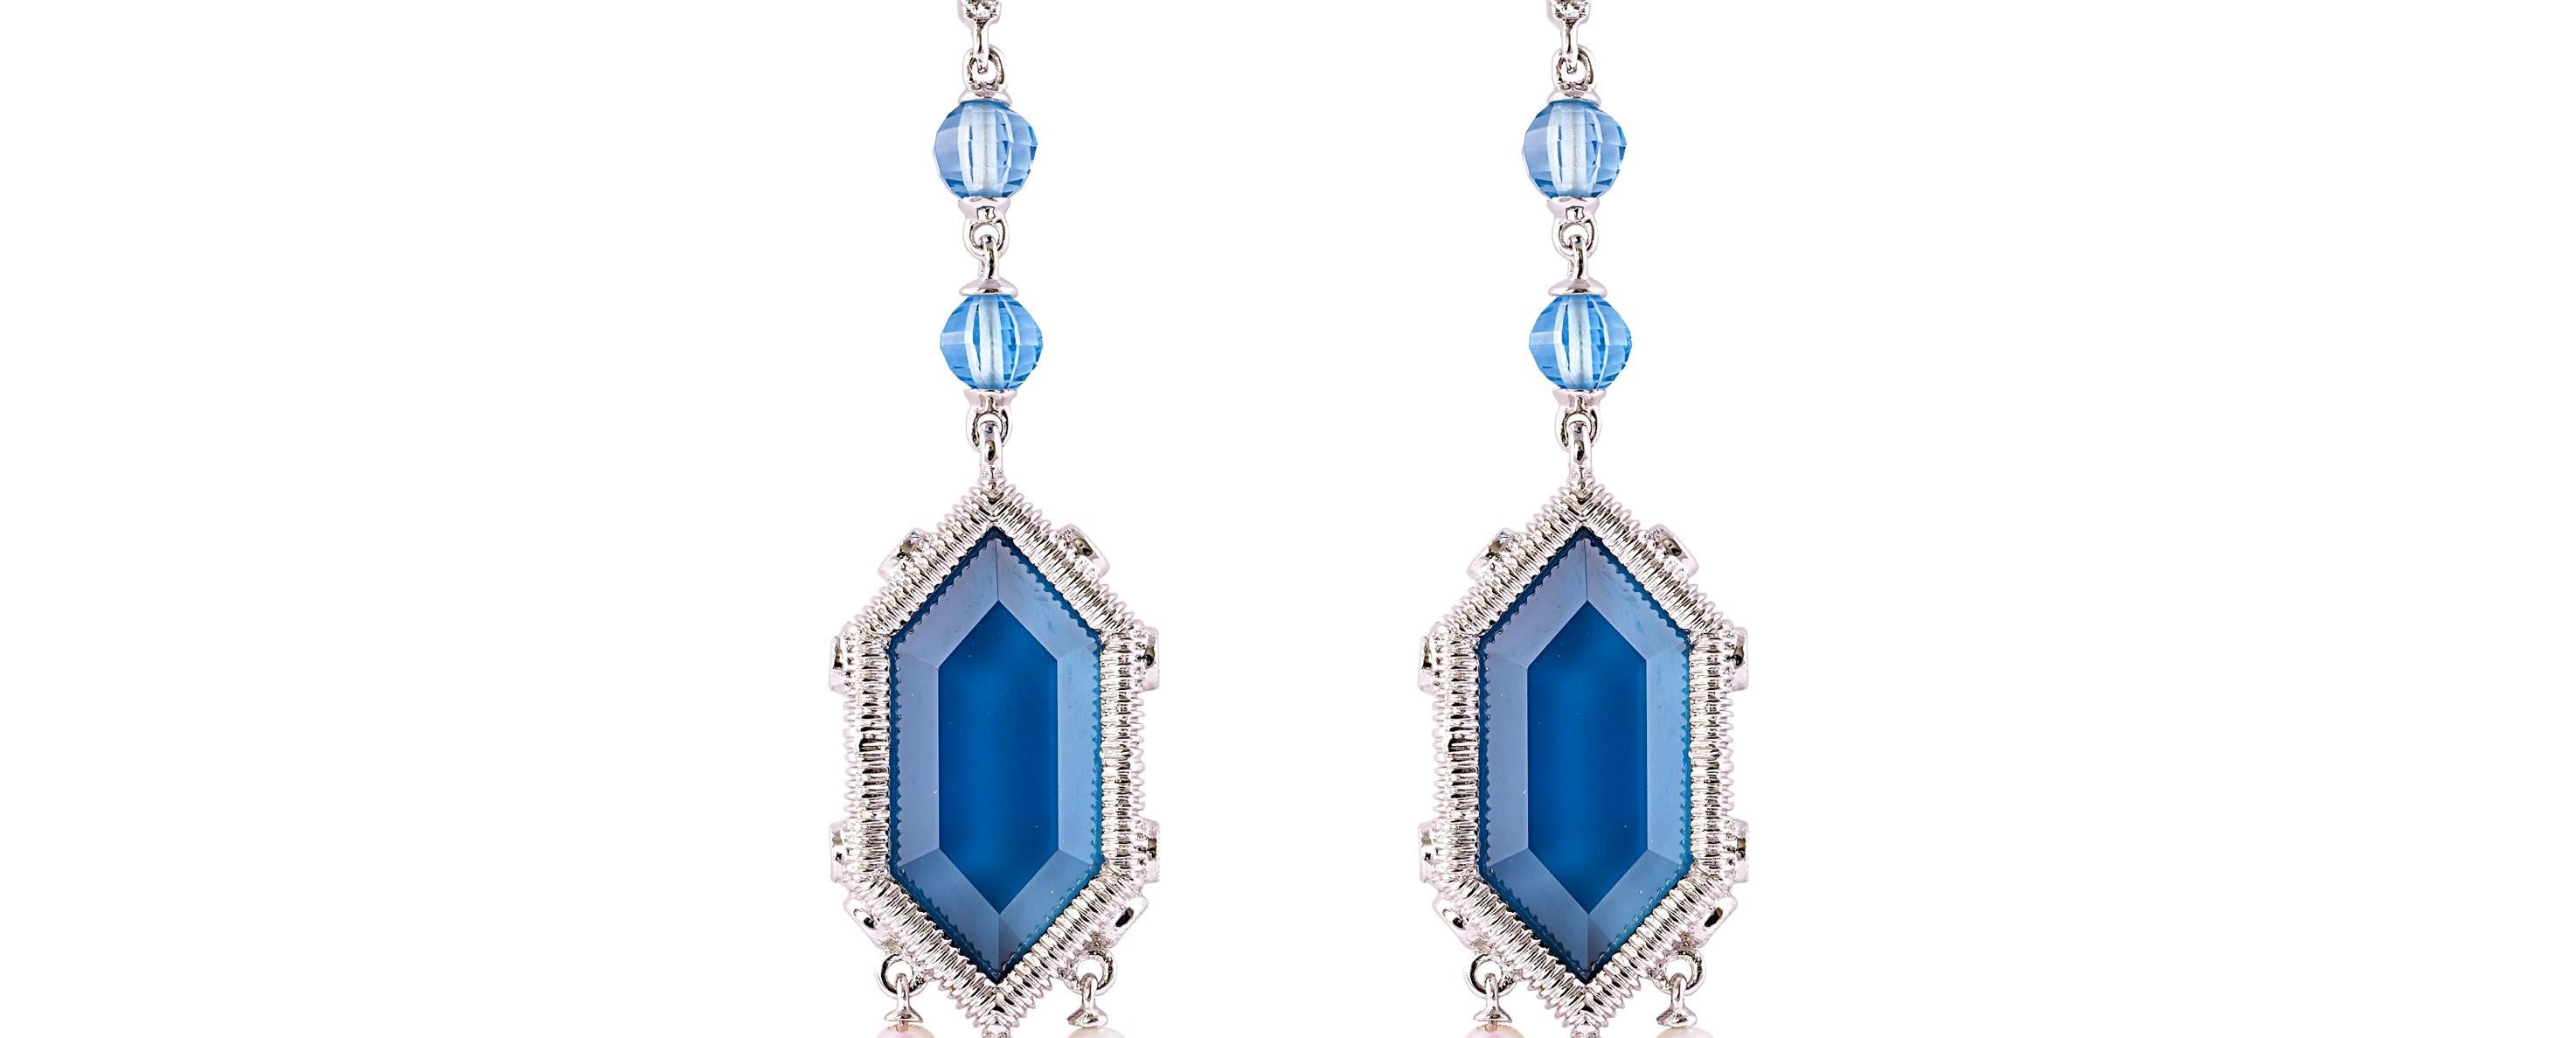 Contemporary 20 Carat London Blue Topaz Earring in 18 Karat Gold with Diamonds and Pearls For Sale